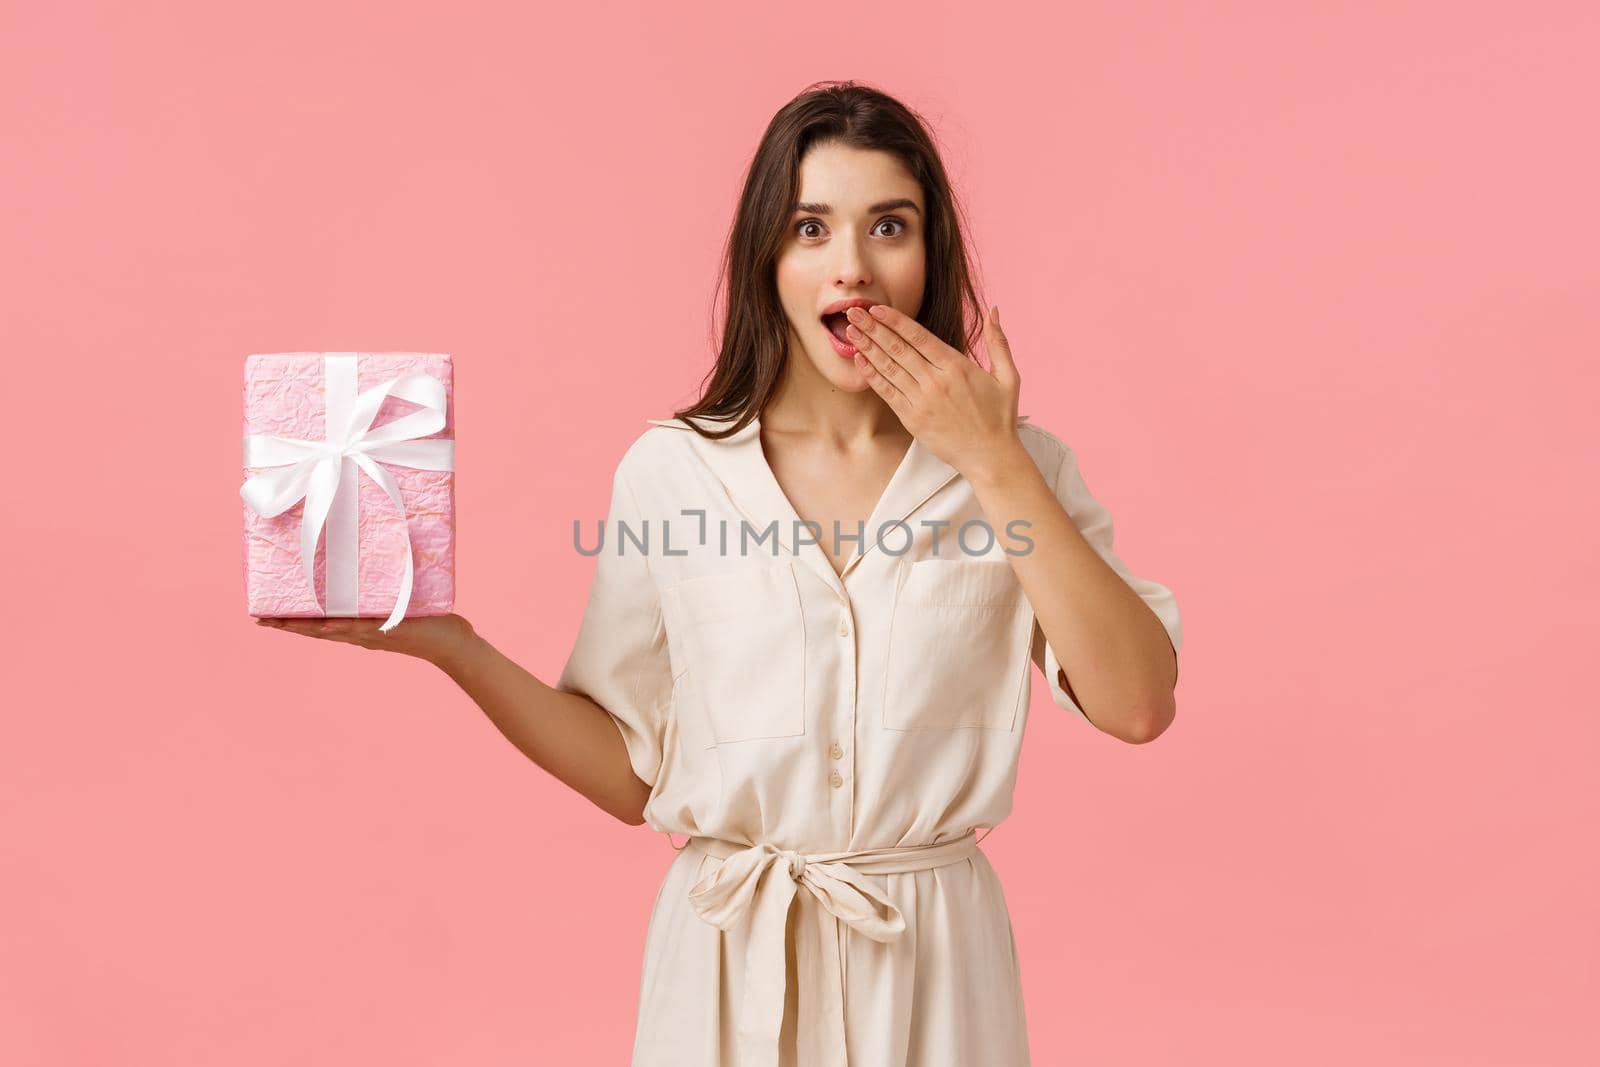 Surprises, holidays and celebration concept. Amused and cheerful attractive young brunette girl in dress, gasping open mouth amazed, receive wonderful birthday gift, pink background.